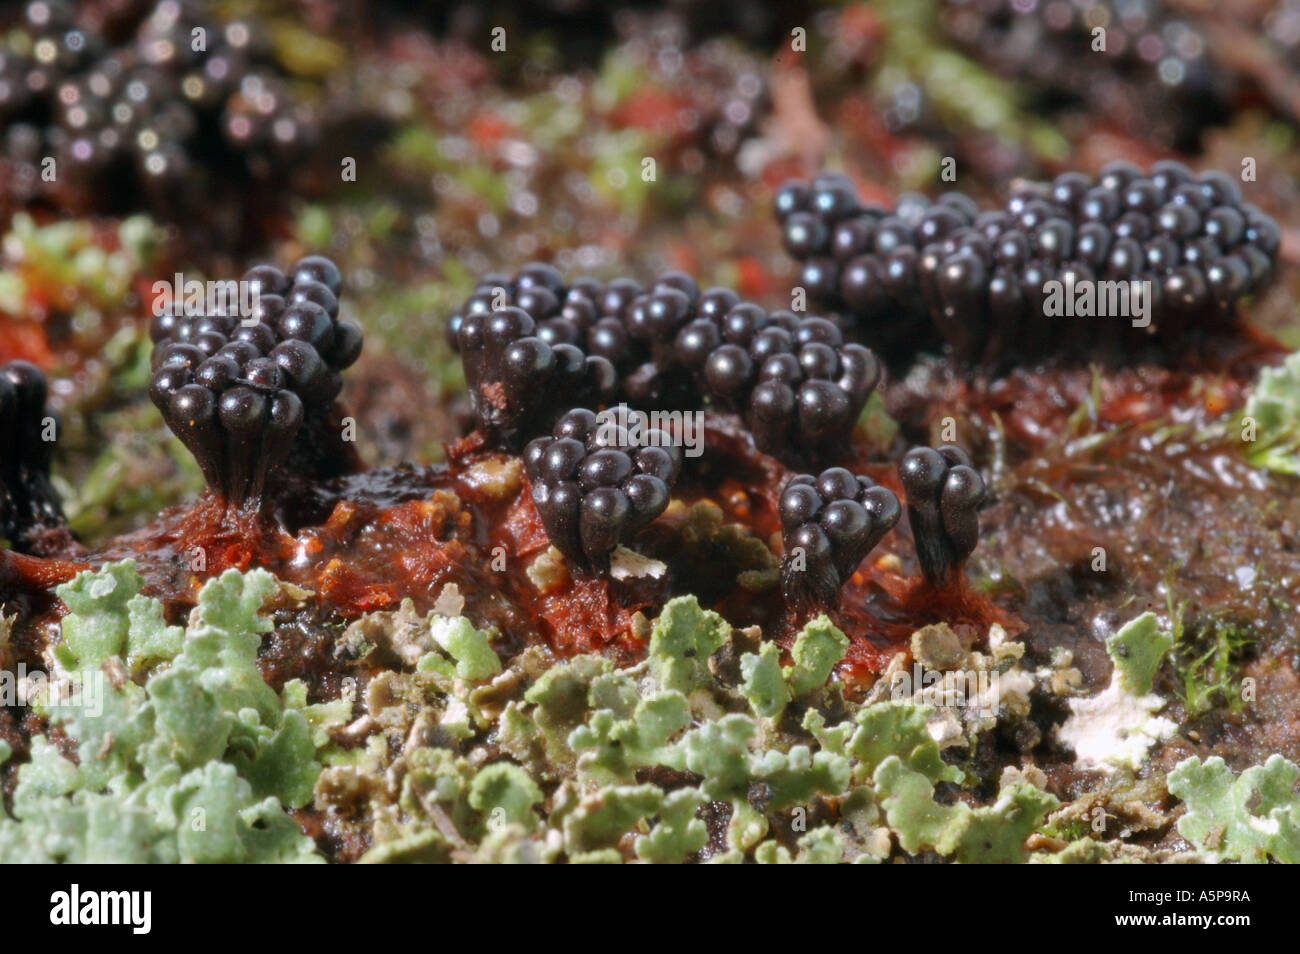 Many minute fruiting bodies of black slime mould or myxomycete Metatrichia vesparium groving in the moss Stock Photo